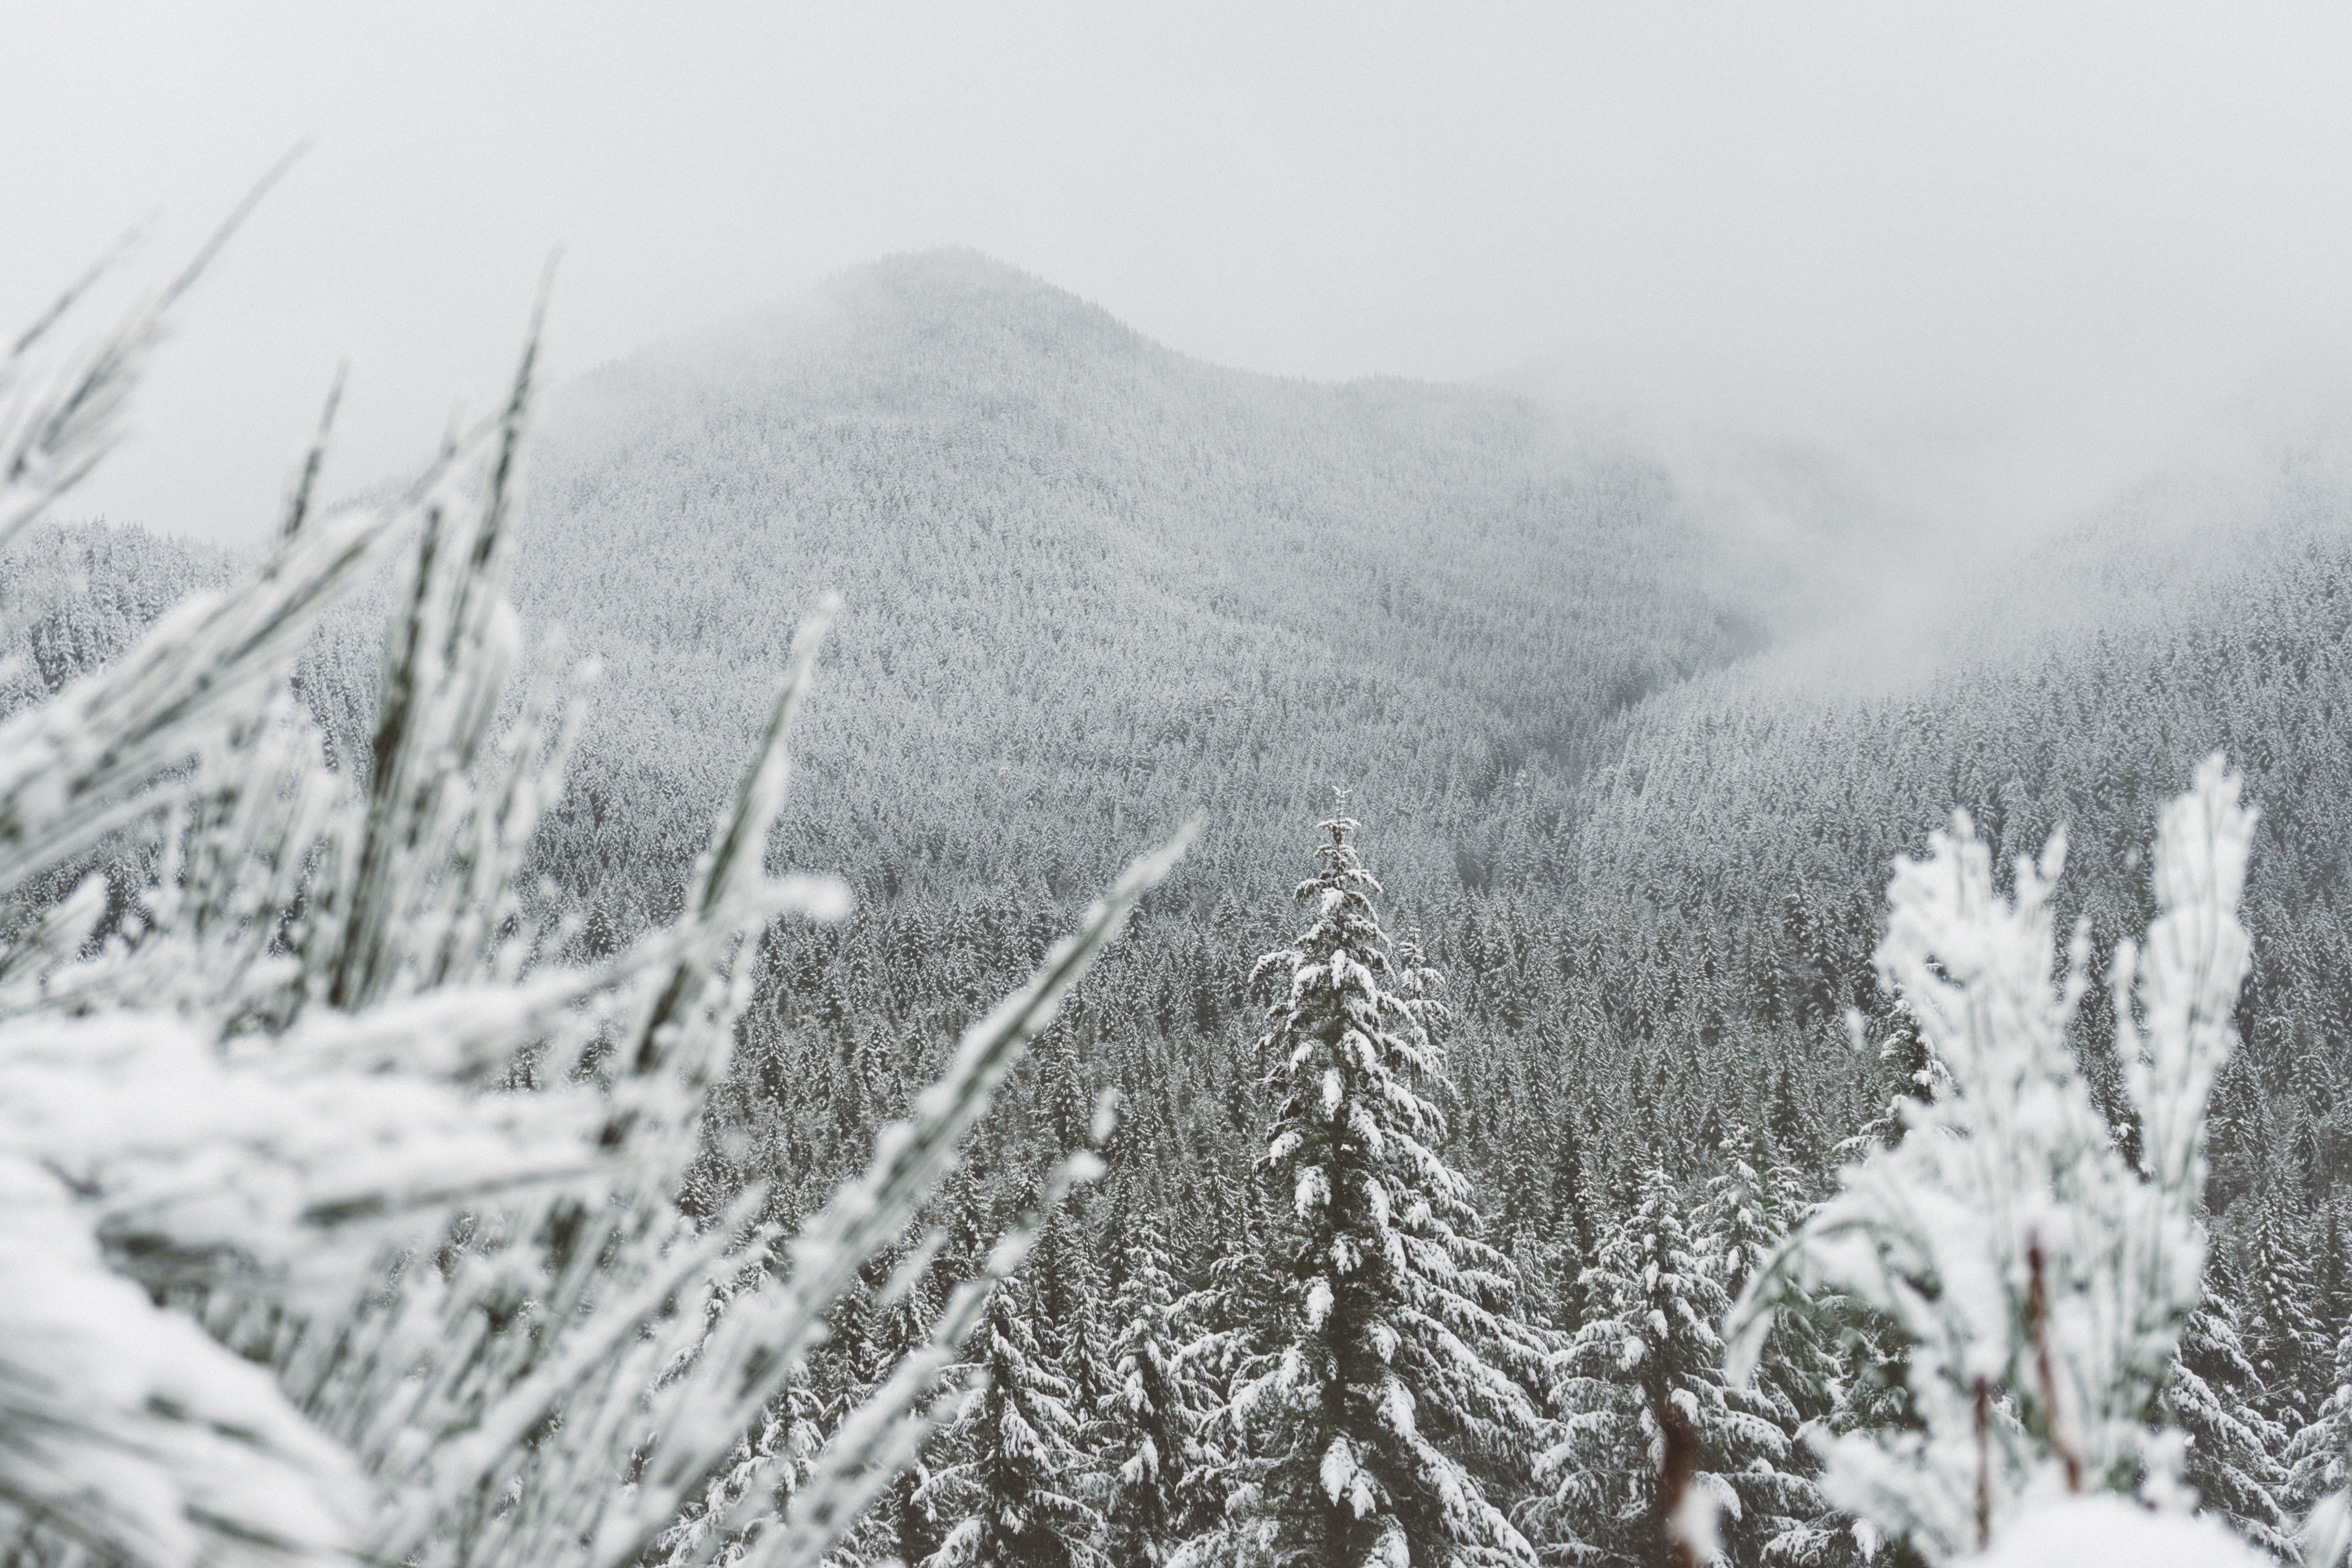 6000x4000 #valley, #weather, #fog, #wallpaper, #snow, #ice, #wood, # winter, #forest, #christmas wallpaper, #mountain, #evergreen, #white, #pine, #slope, #Free , #fir, #cloud, #tree, #christmas background, #cold. Mocah HD Wallpaper